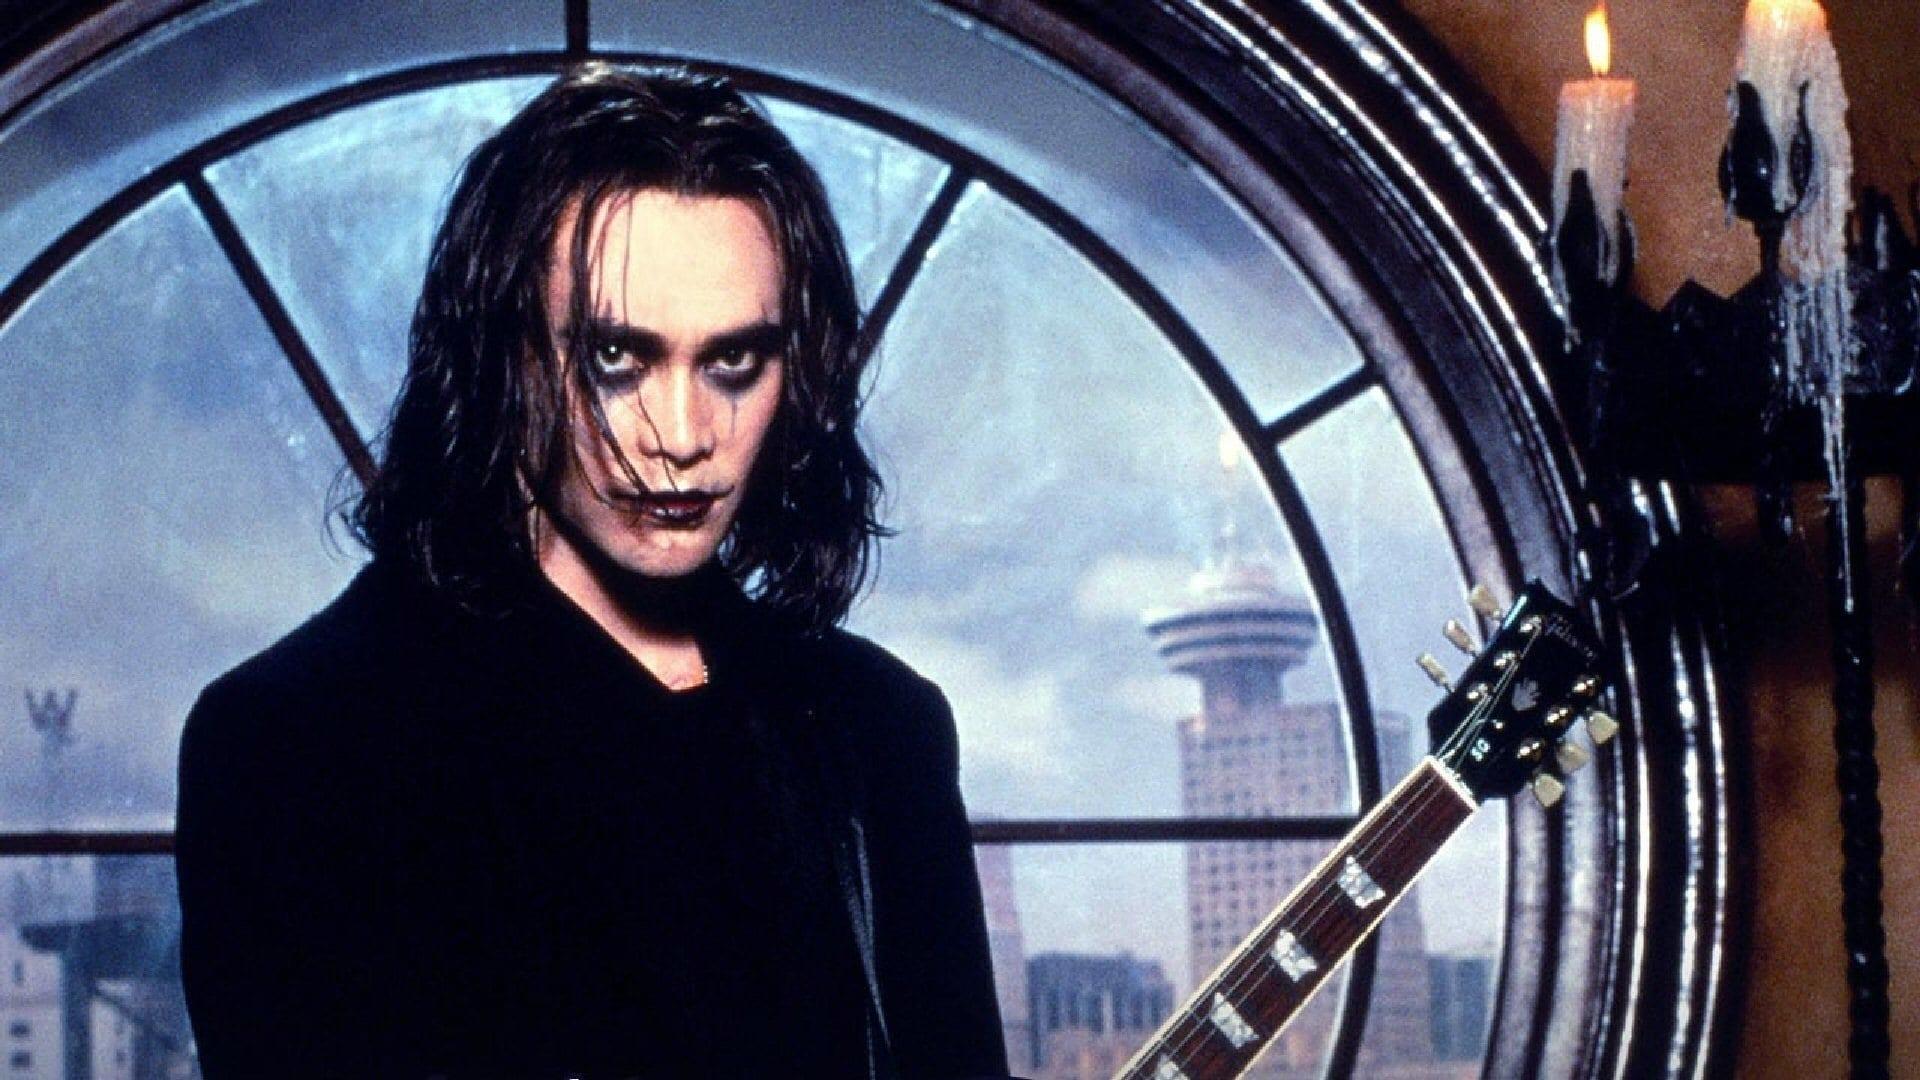 The Crow: Stairway to Heaven backdrop